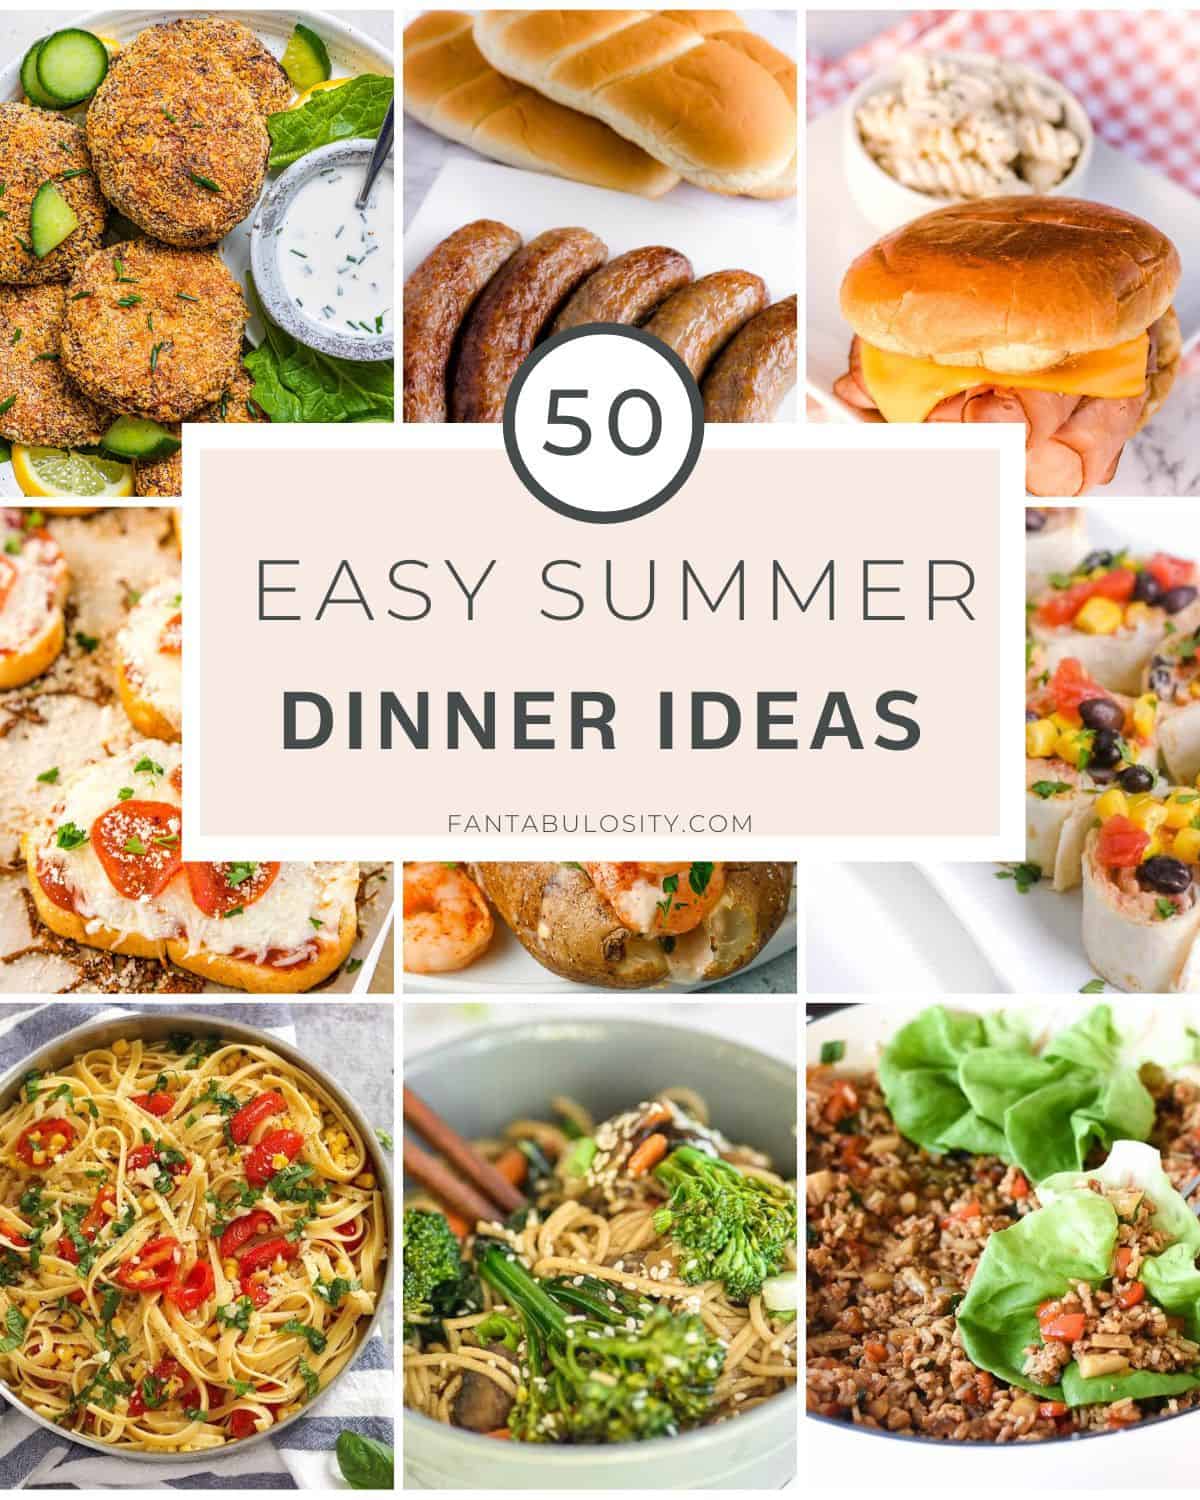 Easy summer dinner recipe collage with text overlay.